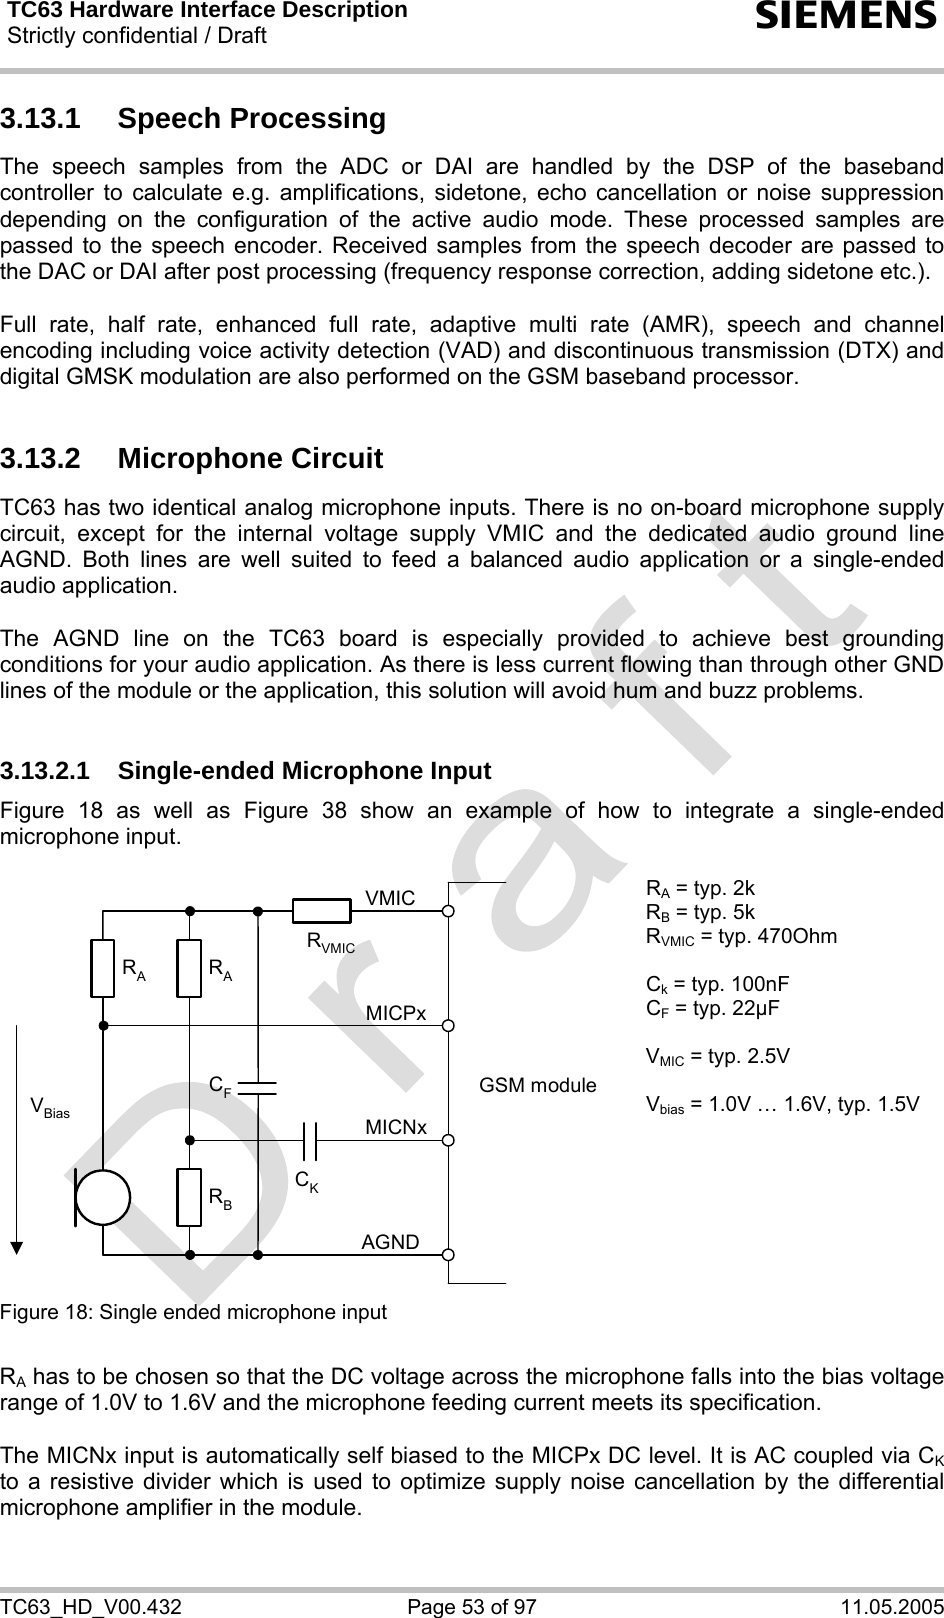 TC63 Hardware Interface Description Strictly confidential / Draft  s TC63_HD_V00.432  Page 53 of 97  11.05.2005 3.13.1 Speech Processing The speech samples from the ADC or DAI are handled by the DSP of the baseband controller to calculate e.g. amplifications, sidetone, echo cancellation or noise suppression depending on the configuration of the active audio mode. These processed samples are passed to the speech encoder. Received samples from the speech decoder are passed to the DAC or DAI after post processing (frequency response correction, adding sidetone etc.).  Full rate, half rate, enhanced full rate, adaptive multi rate (AMR), speech and channel encoding including voice activity detection (VAD) and discontinuous transmission (DTX) and digital GMSK modulation are also performed on the GSM baseband processor.  3.13.2 Microphone Circuit TC63 has two identical analog microphone inputs. There is no on-board microphone supply circuit, except for the internal voltage supply VMIC and the dedicated audio ground line AGND. Both lines are well suited to feed a balanced audio application or a single-ended audio application.   The AGND line on the TC63 board is especially provided to achieve best grounding conditions for your audio application. As there is less current flowing than through other GND lines of the module or the application, this solution will avoid hum and buzz problems.   3.13.2.1 Single-ended Microphone Input Figure 18 as well as Figure 38 show an example of how to integrate a single-ended microphone input.   GSM moduleRBVBiasCKAGNDMICNxMICPxVMICRARACFRVMICRA = typ. 2k RB = typ. 5k RVMIC = typ. 470Ohm  Ck = typ. 100nF CF = typ. 22µF  VMIC = typ. 2.5V  Vbias = 1.0V … 1.6V, typ. 1.5V Figure 18: Single ended microphone input    RA has to be chosen so that the DC voltage across the microphone falls into the bias voltage range of 1.0V to 1.6V and the microphone feeding current meets its specification.  The MICNx input is automatically self biased to the MICPx DC level. It is AC coupled via CK to a resistive divider which is used to optimize supply noise cancellation by the differential microphone amplifier in the module.   